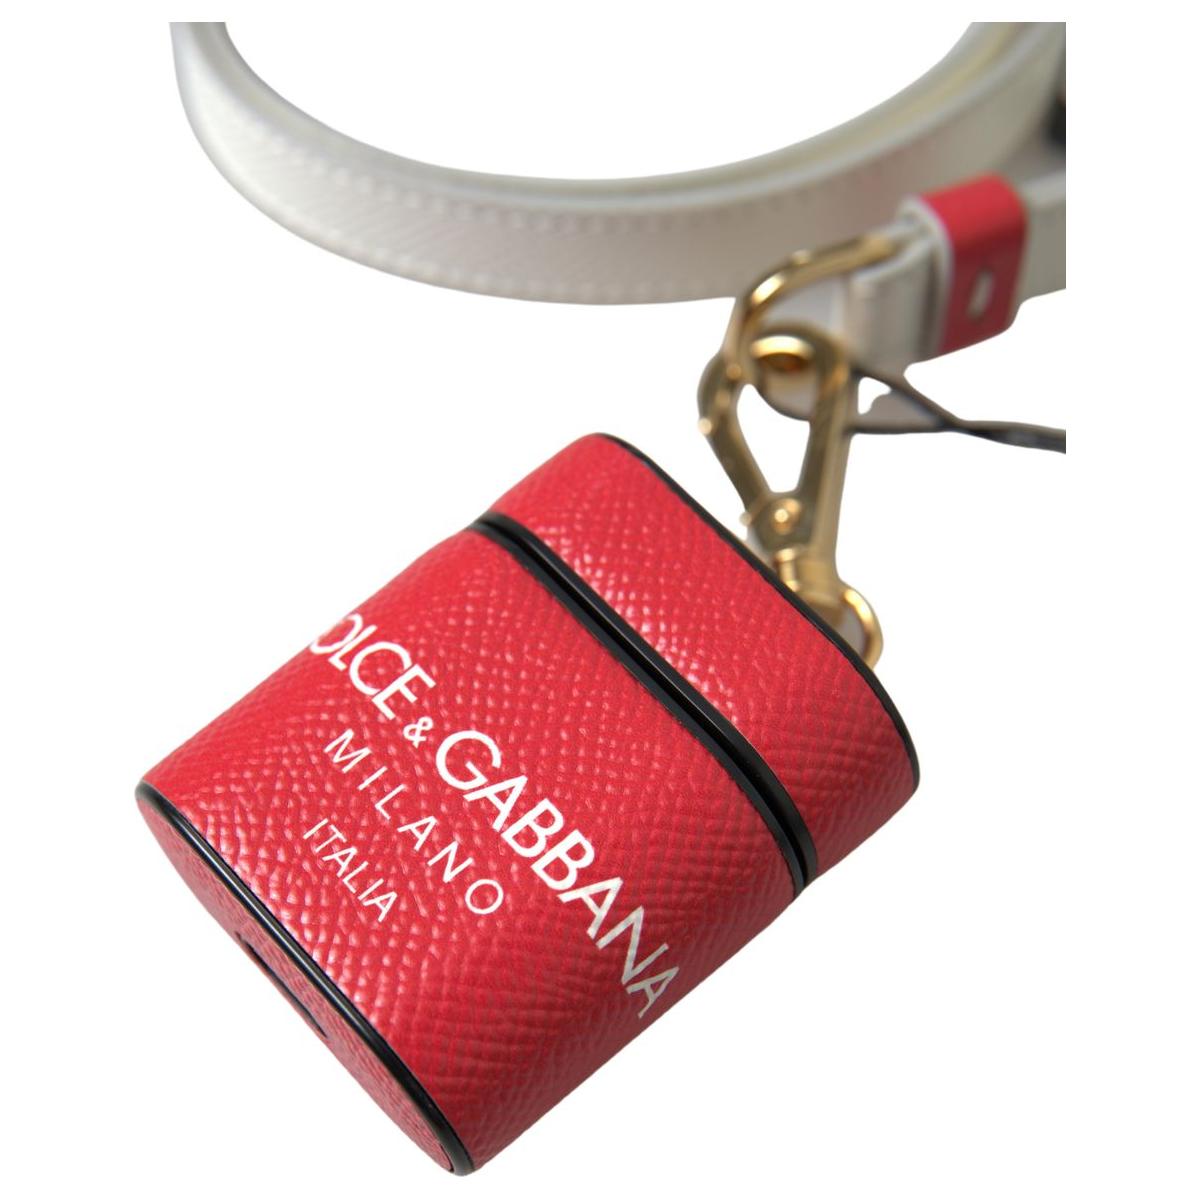 Dolce & Gabbana Elegant Red Leather Airpods Case red-leather-gold-tone-metal-logo-print-airpods-case 465A4905-980e7e5c-460.jpg